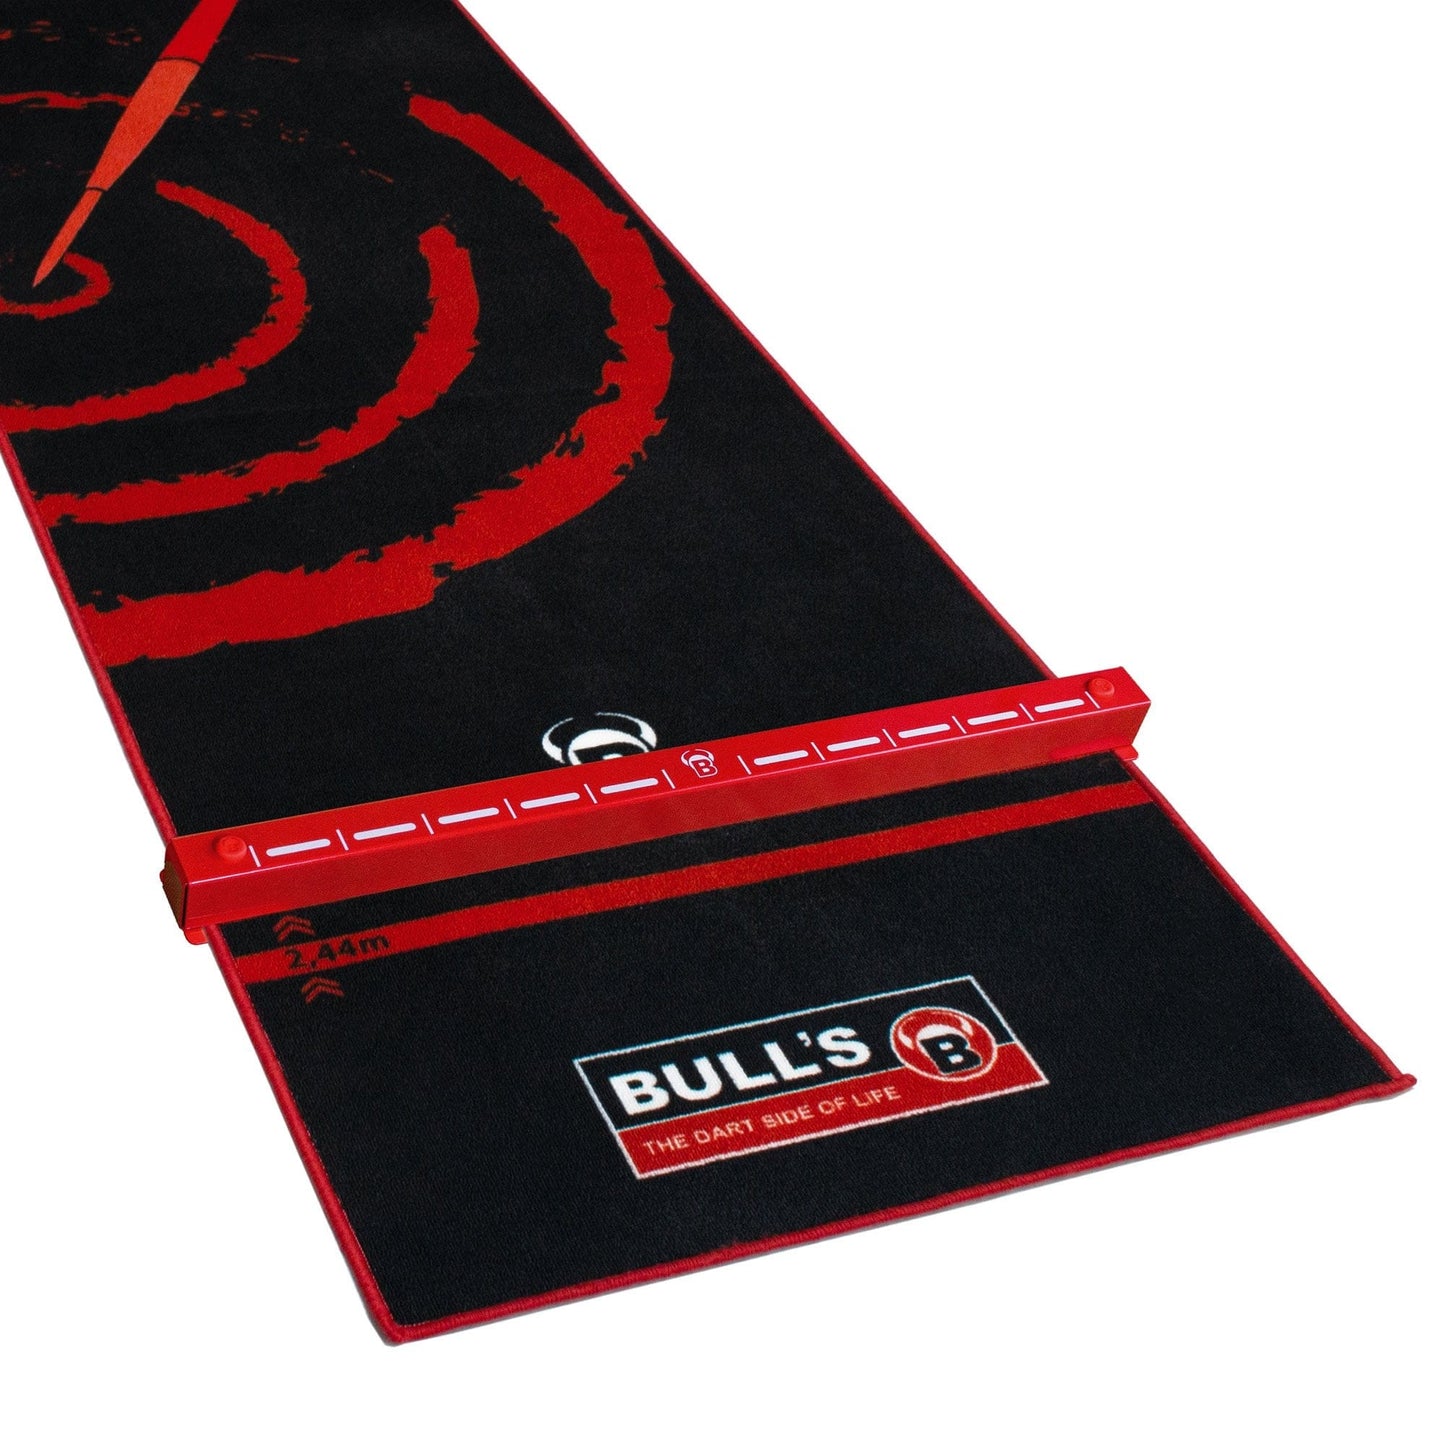 BULL'S Oky System - O60 - For Use With Dart Mats Upto 60cm Wide - Red Raised Oche